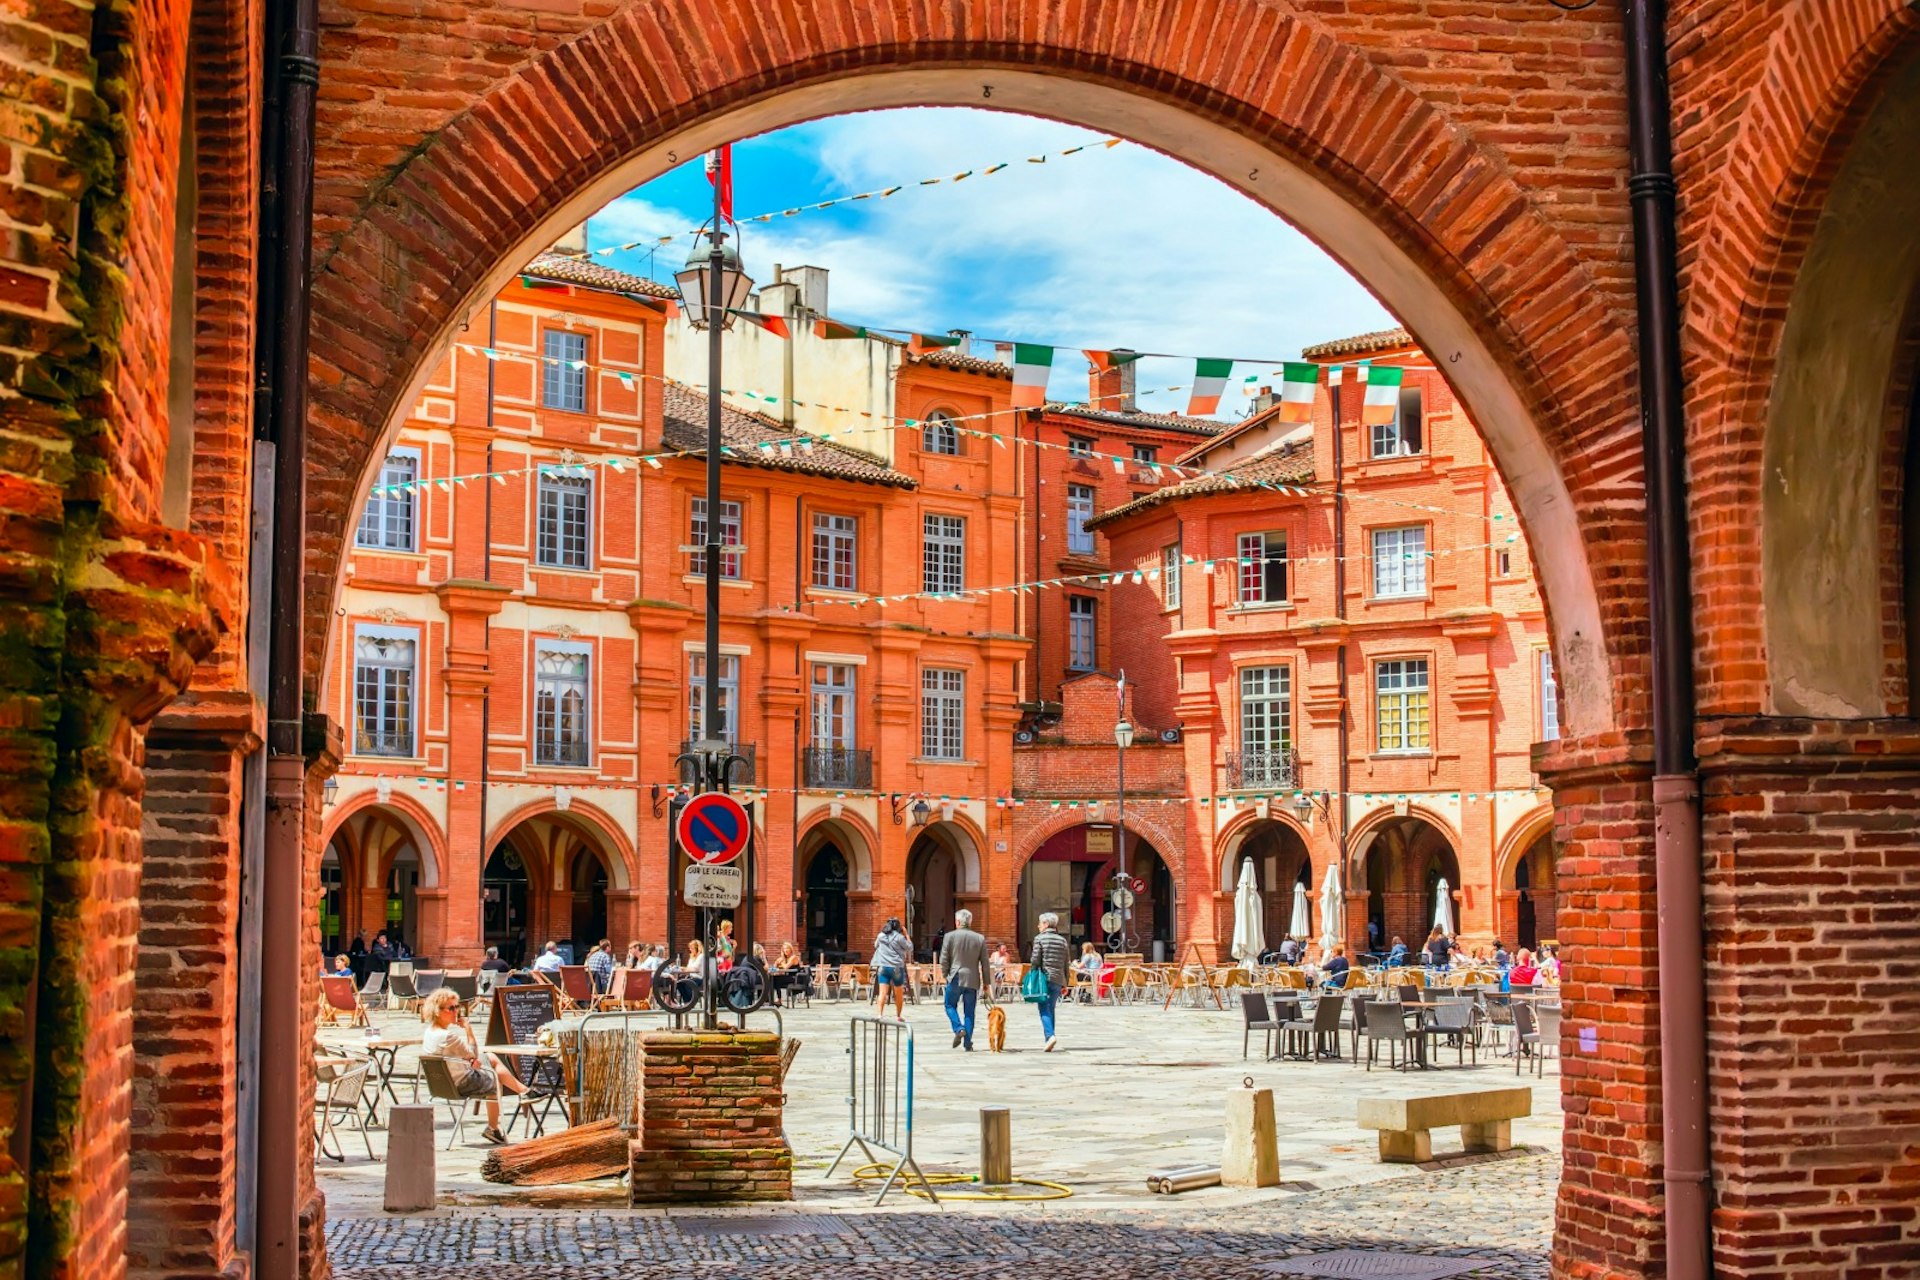 Montauban is one of southwest France's most admirable bastides (fortified new towns). Image © Natashilo / Shutterstock